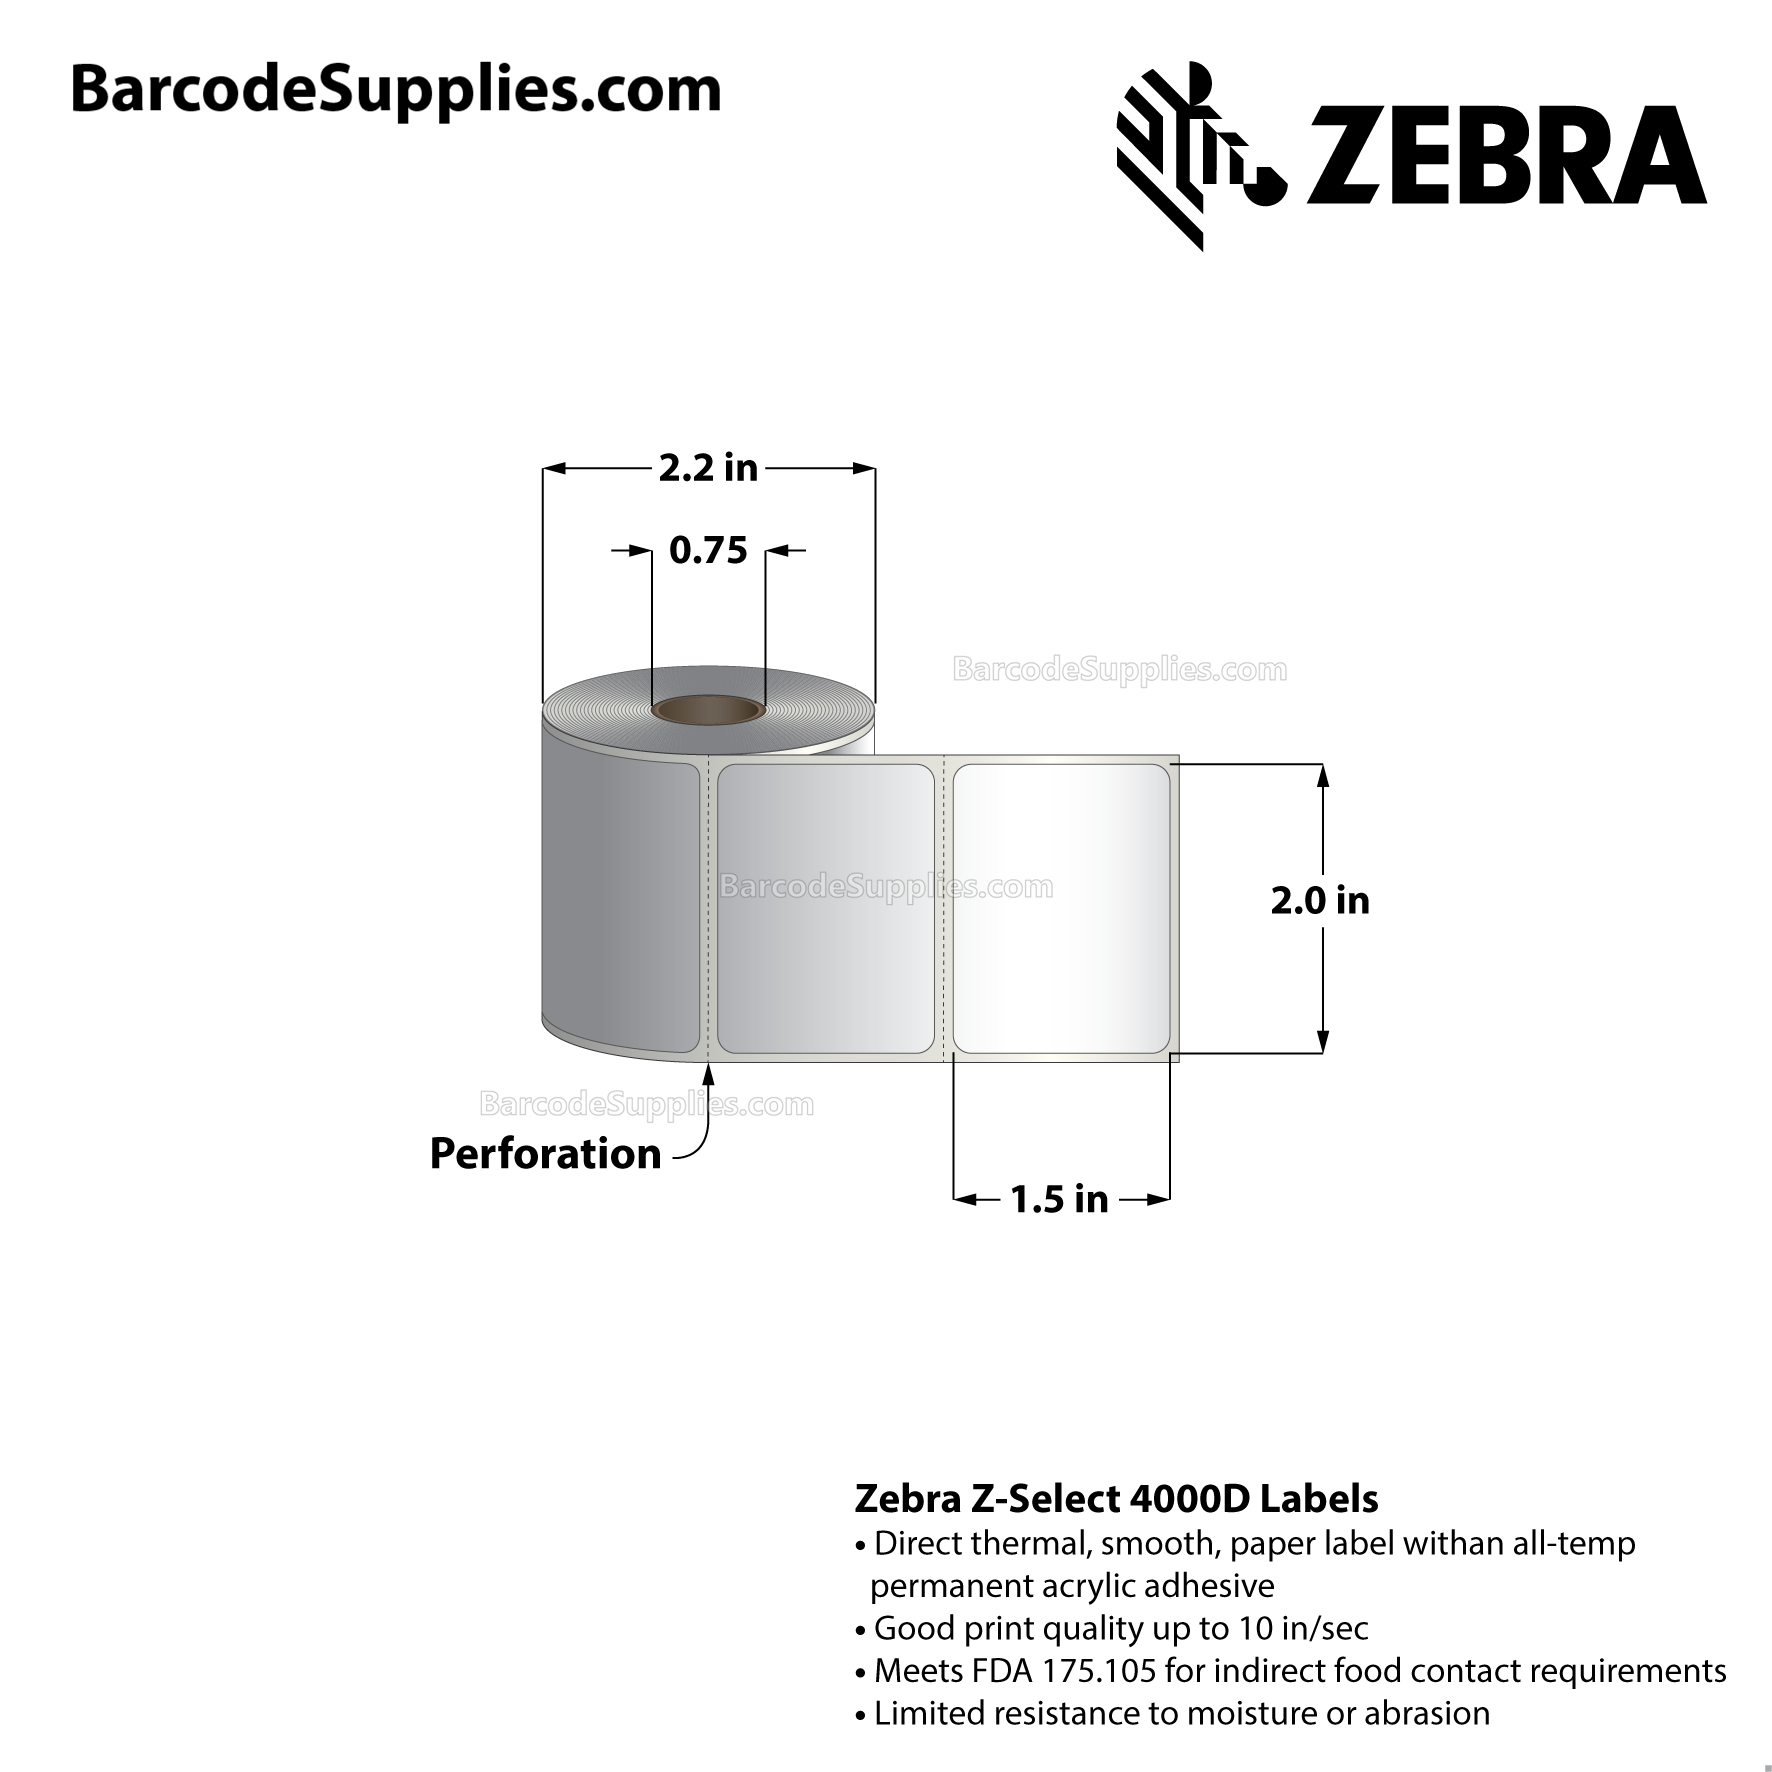 2 x 1.5 Direct Thermal White Z-Select 4000D Labels With All-Temp Adhesive - Perforated - 284 Labels Per Roll - Carton Of 36 Rolls - 10224 Labels Total - MPN: 10015767